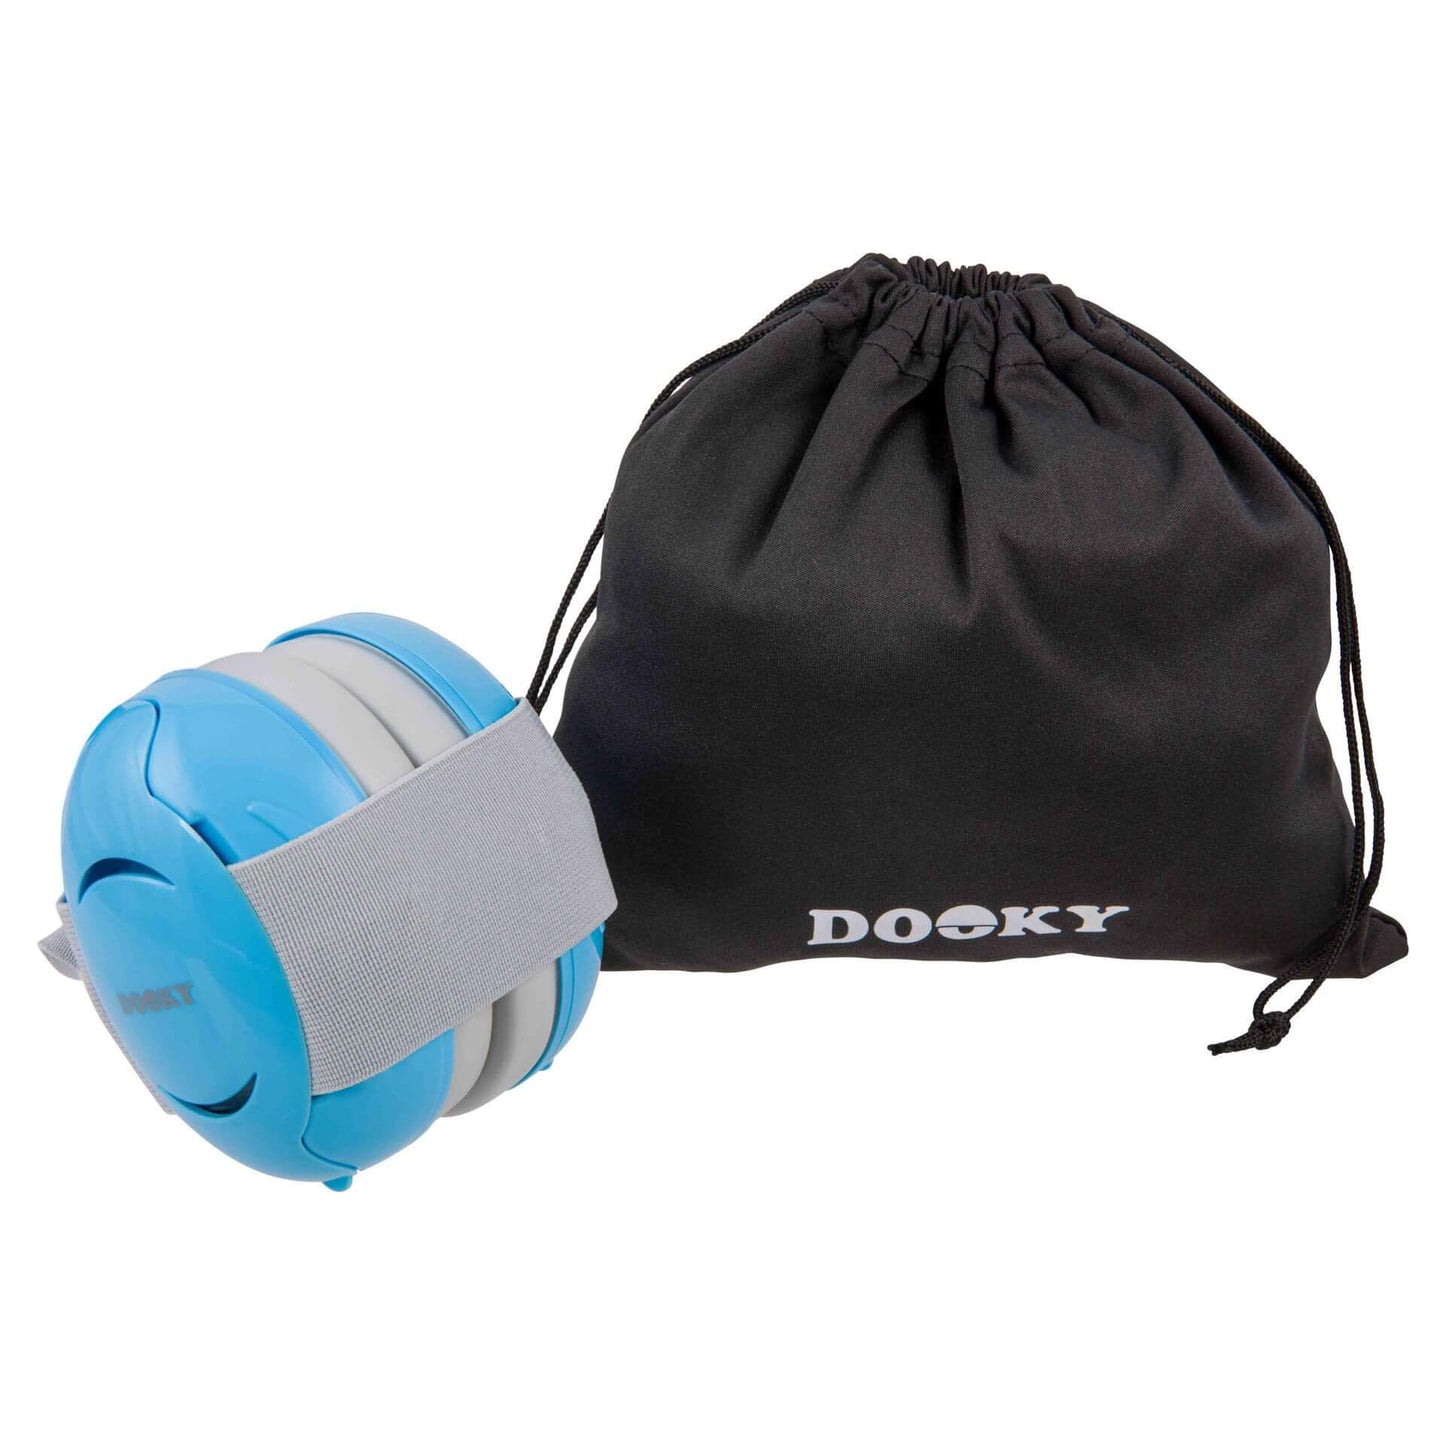 Dooky Baby Ear Protection (Blue)